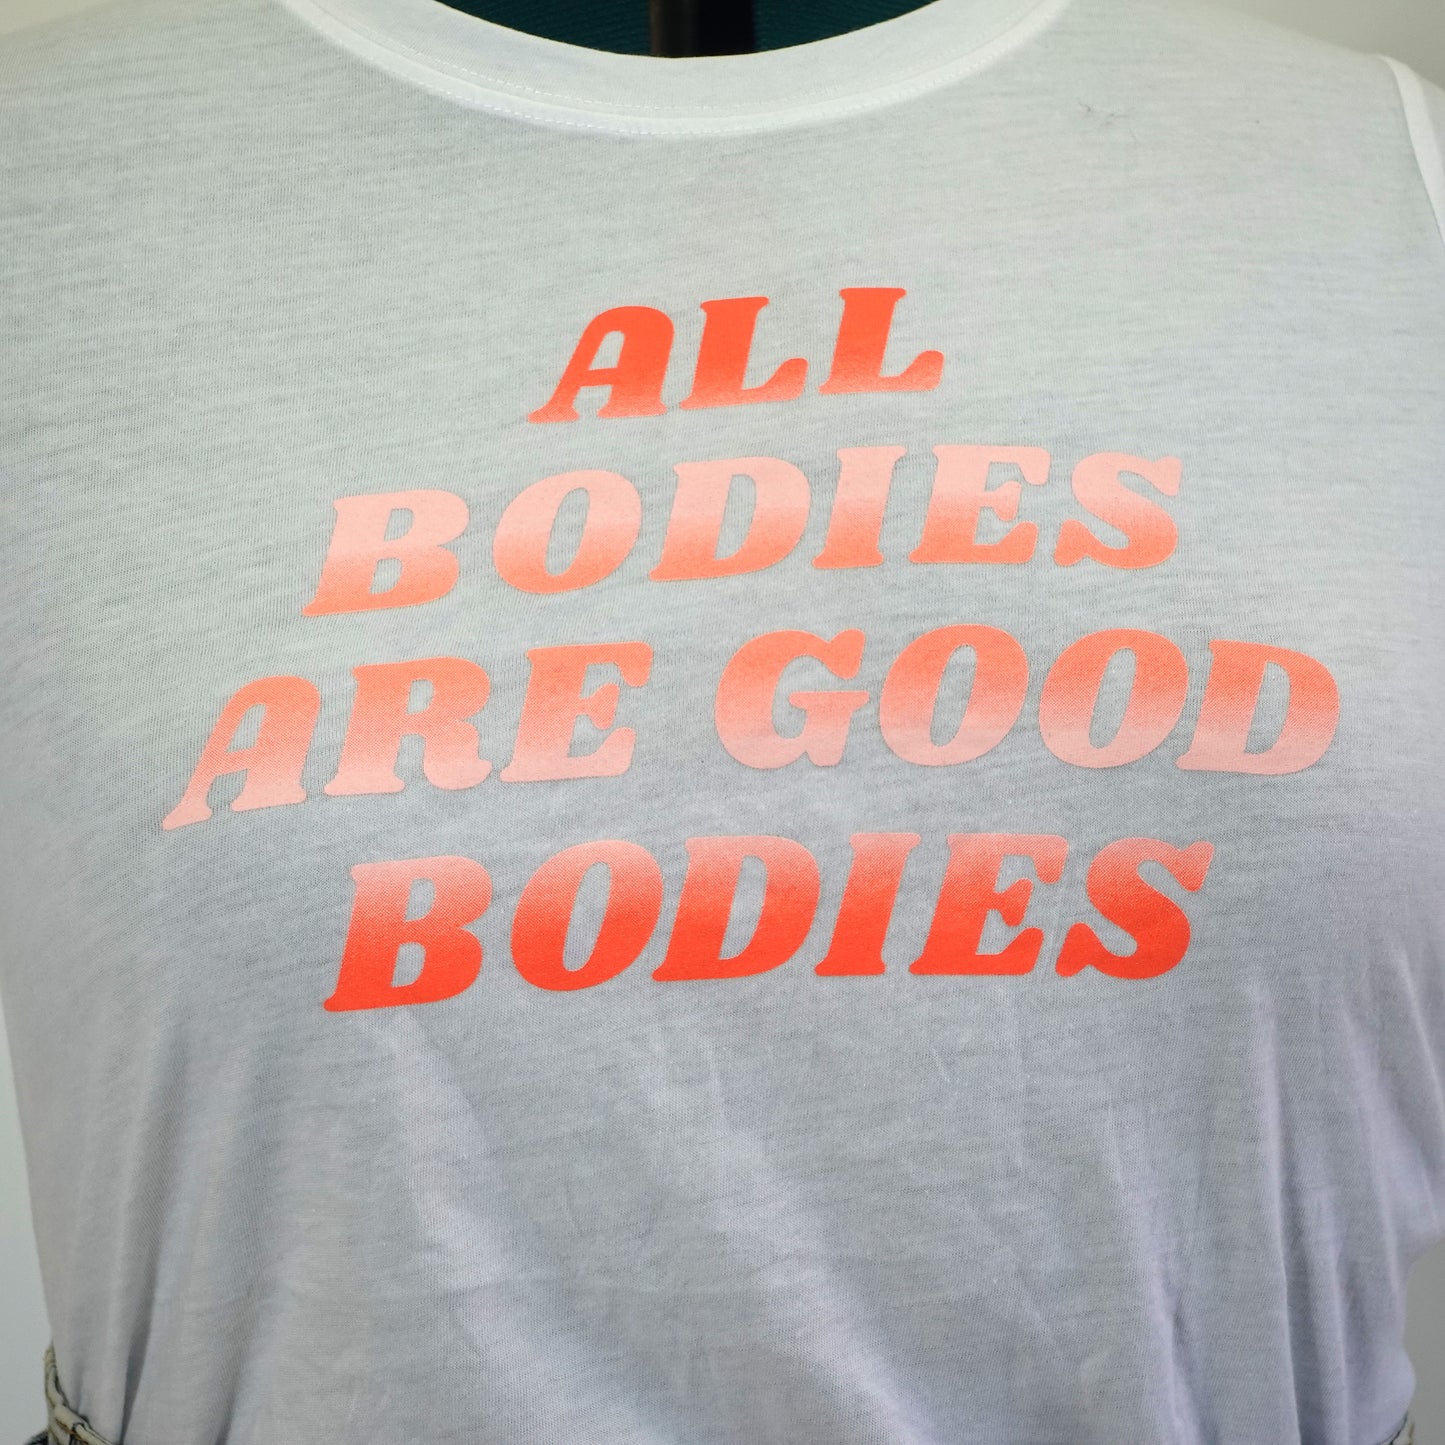 "All Bodies are Good Bodies" White Graphic Tee